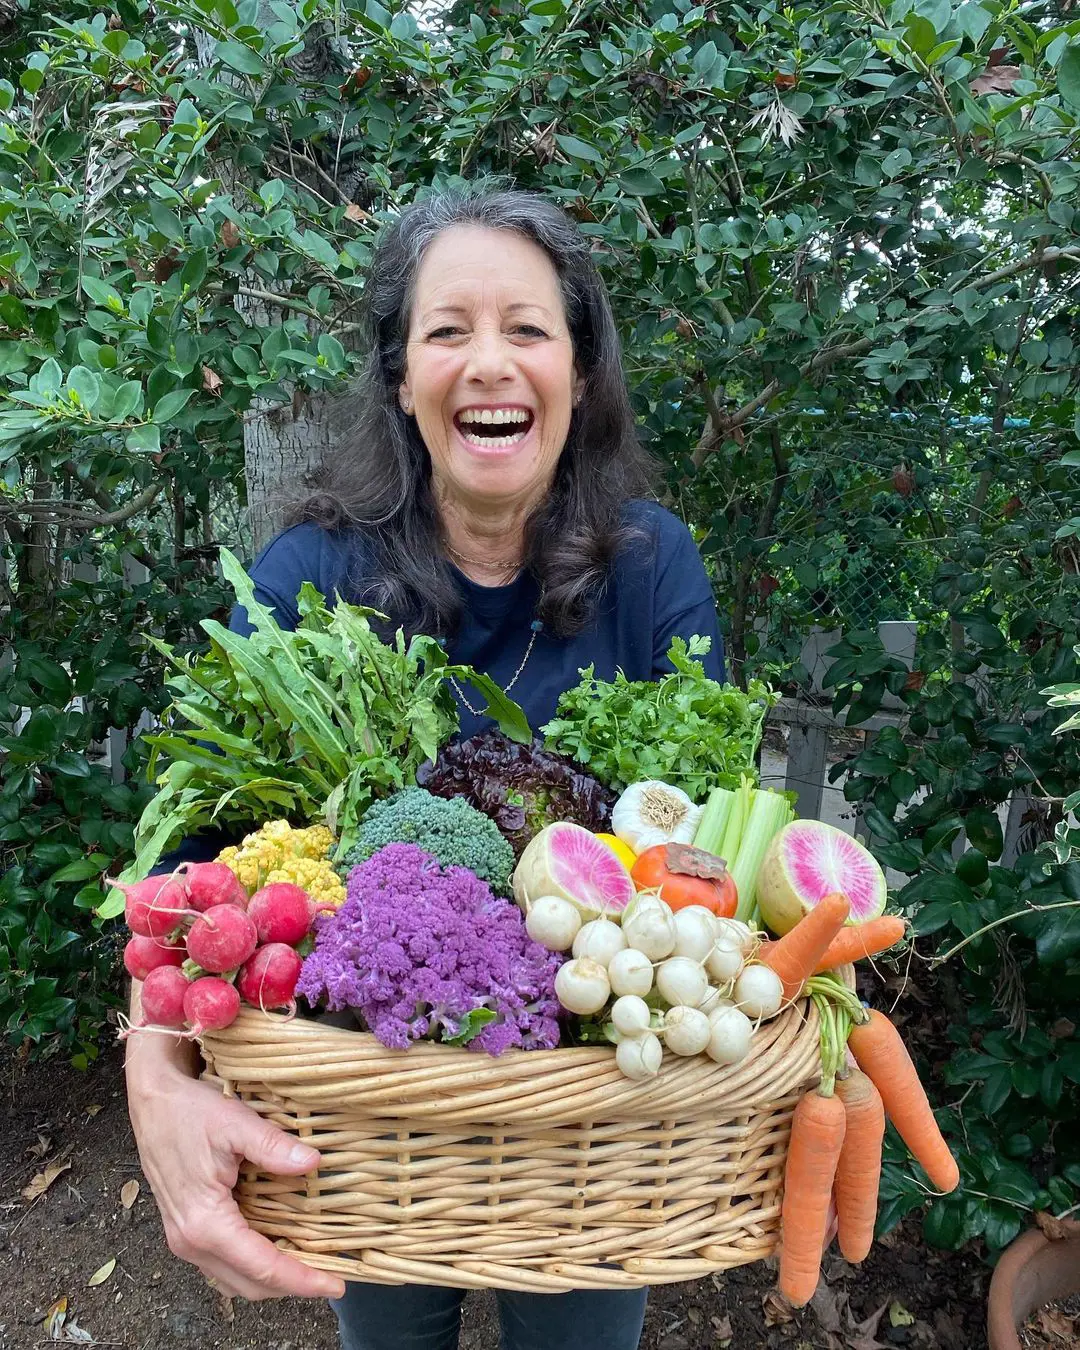 Peggy excited to share the recipe and talk about seasonal vegetables.